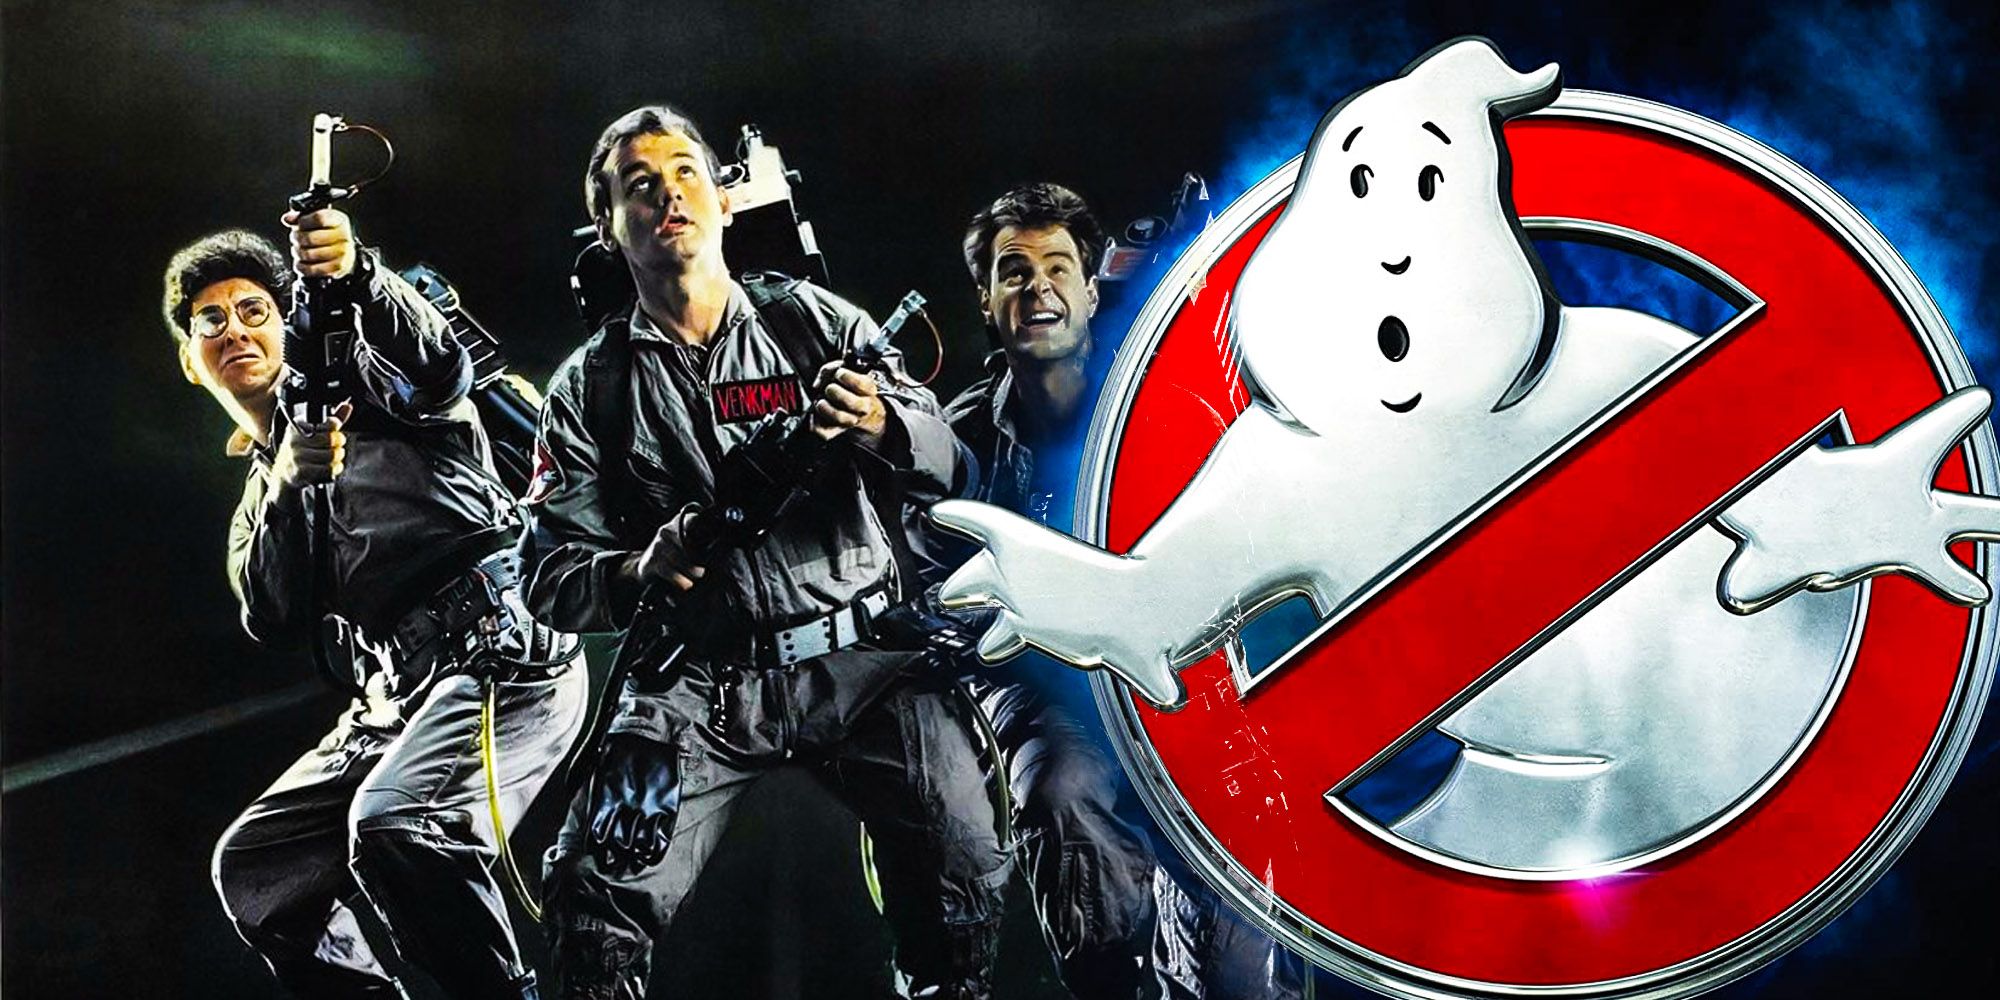 The Original Ghostbusters Script Was A Very Different Movie